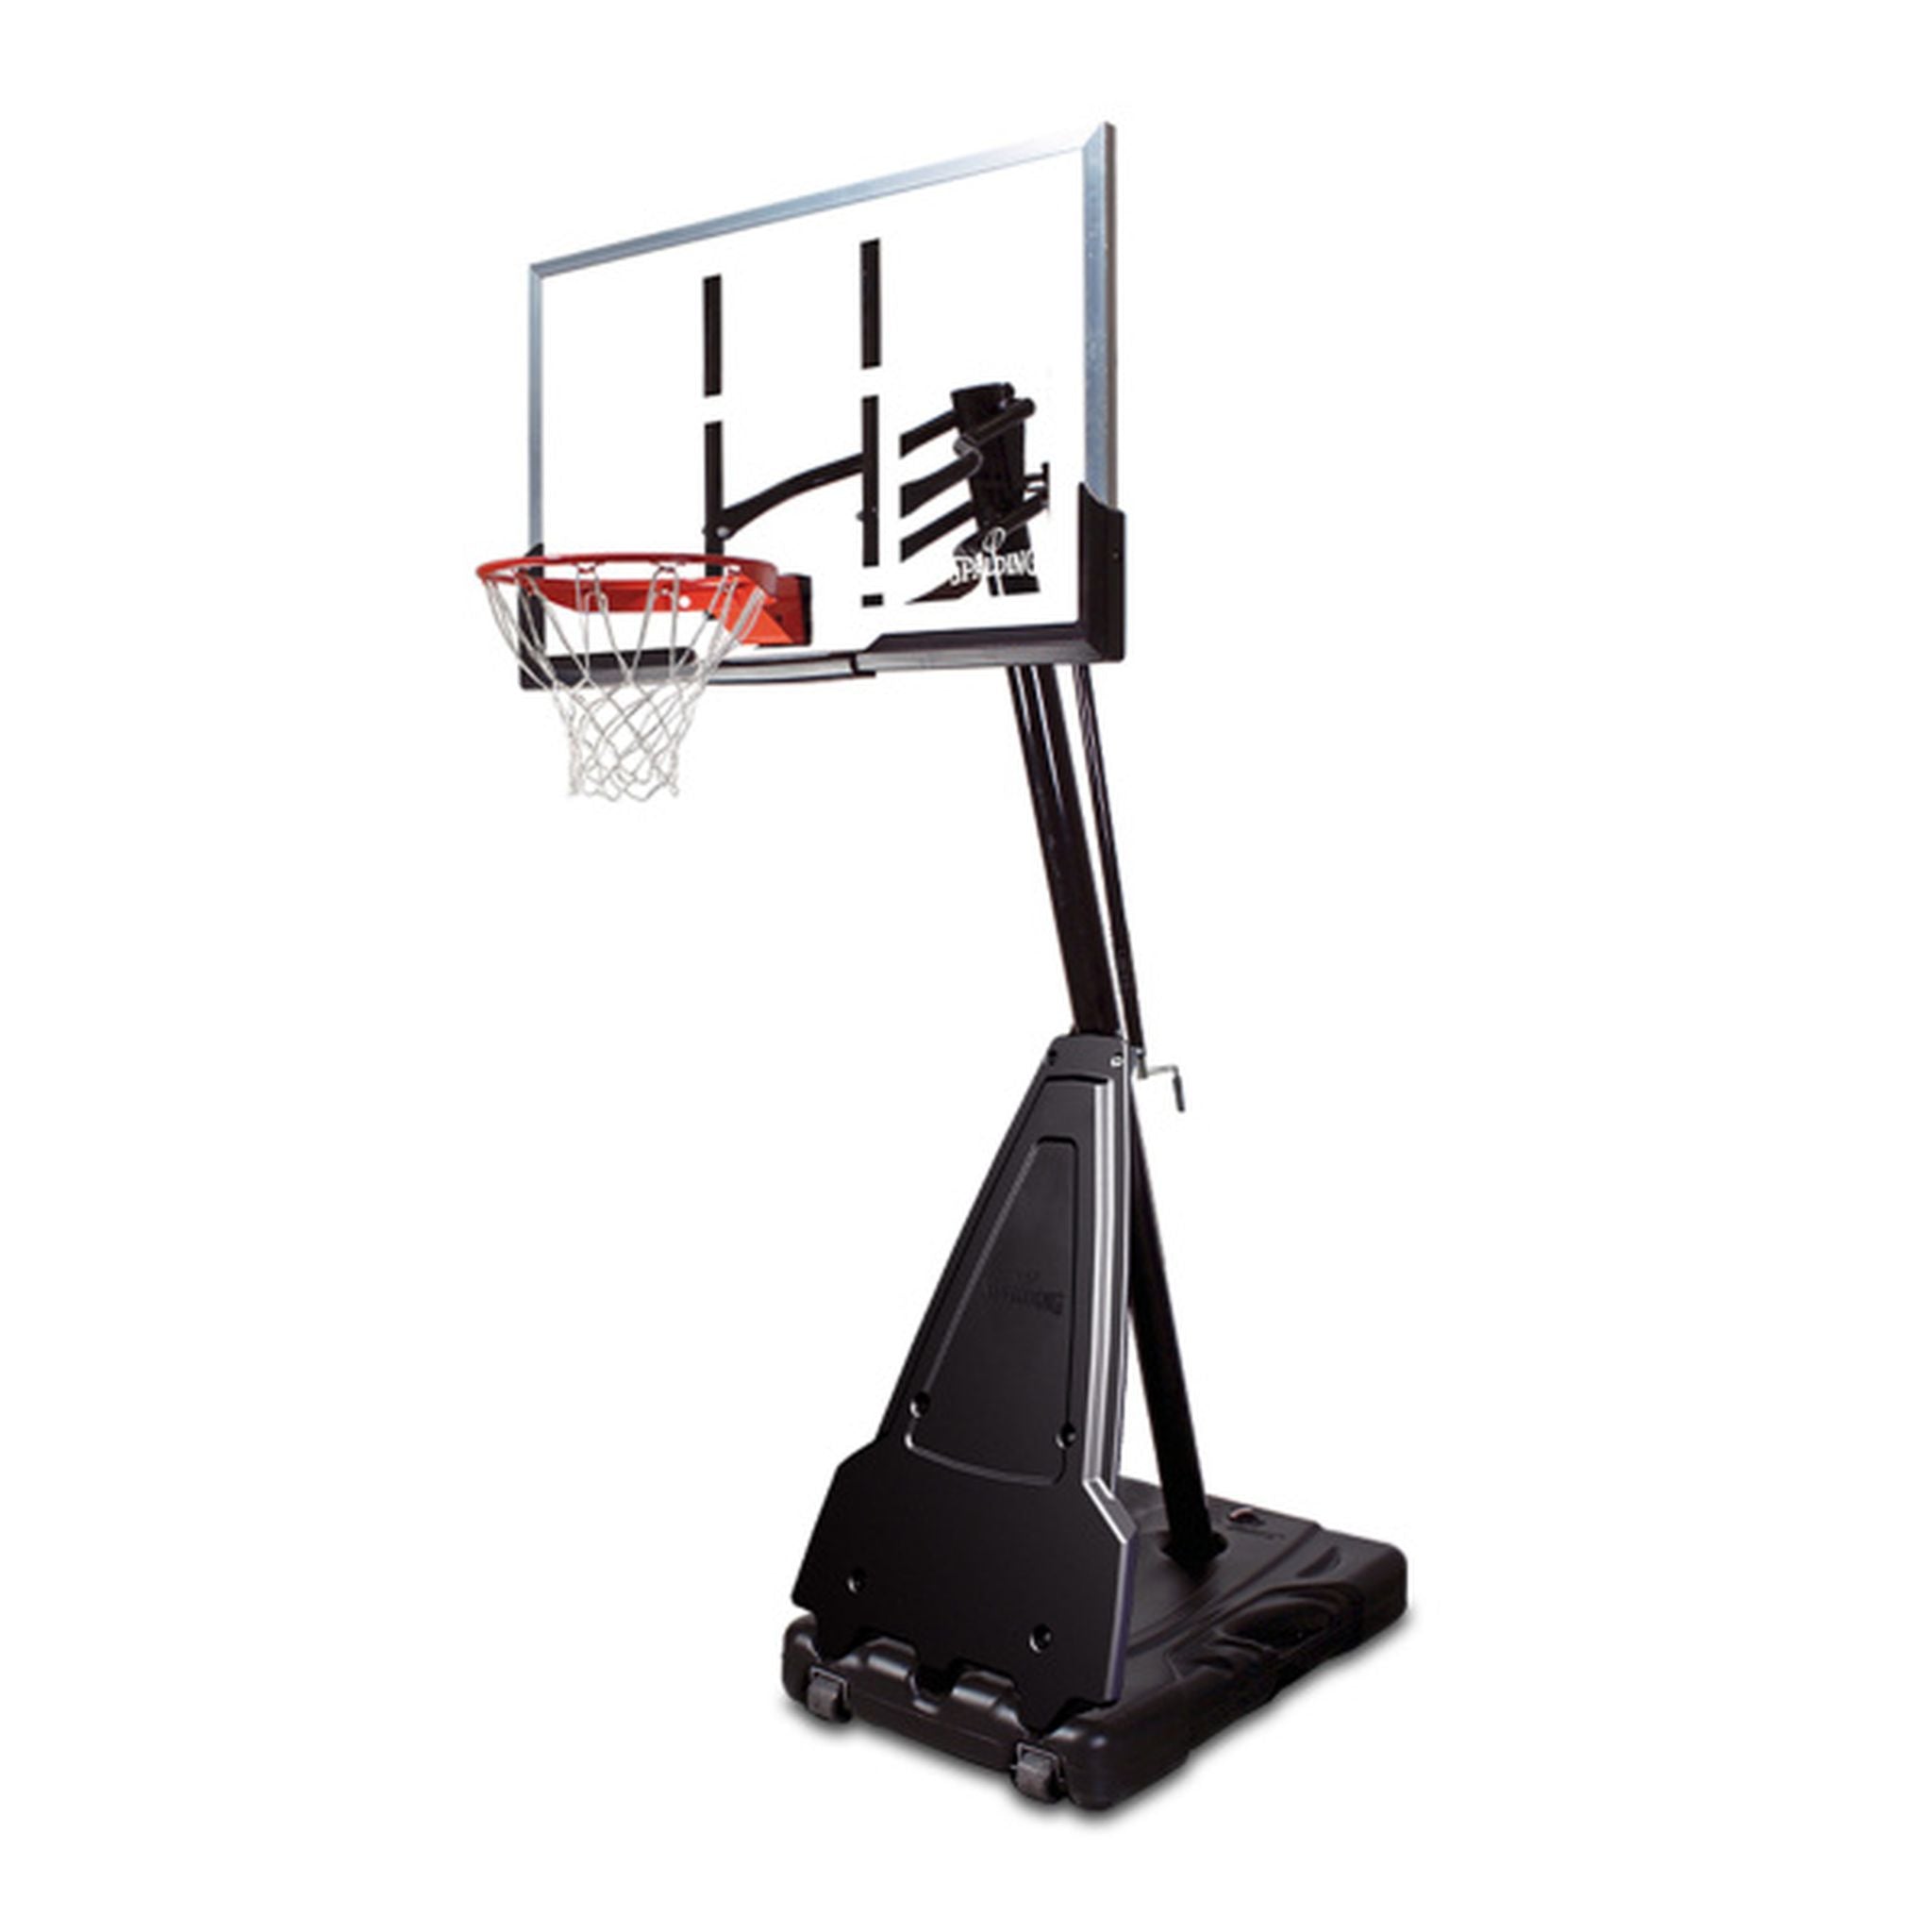 Spalding 60-inch Ultimate Acrylic Portable Basketball System